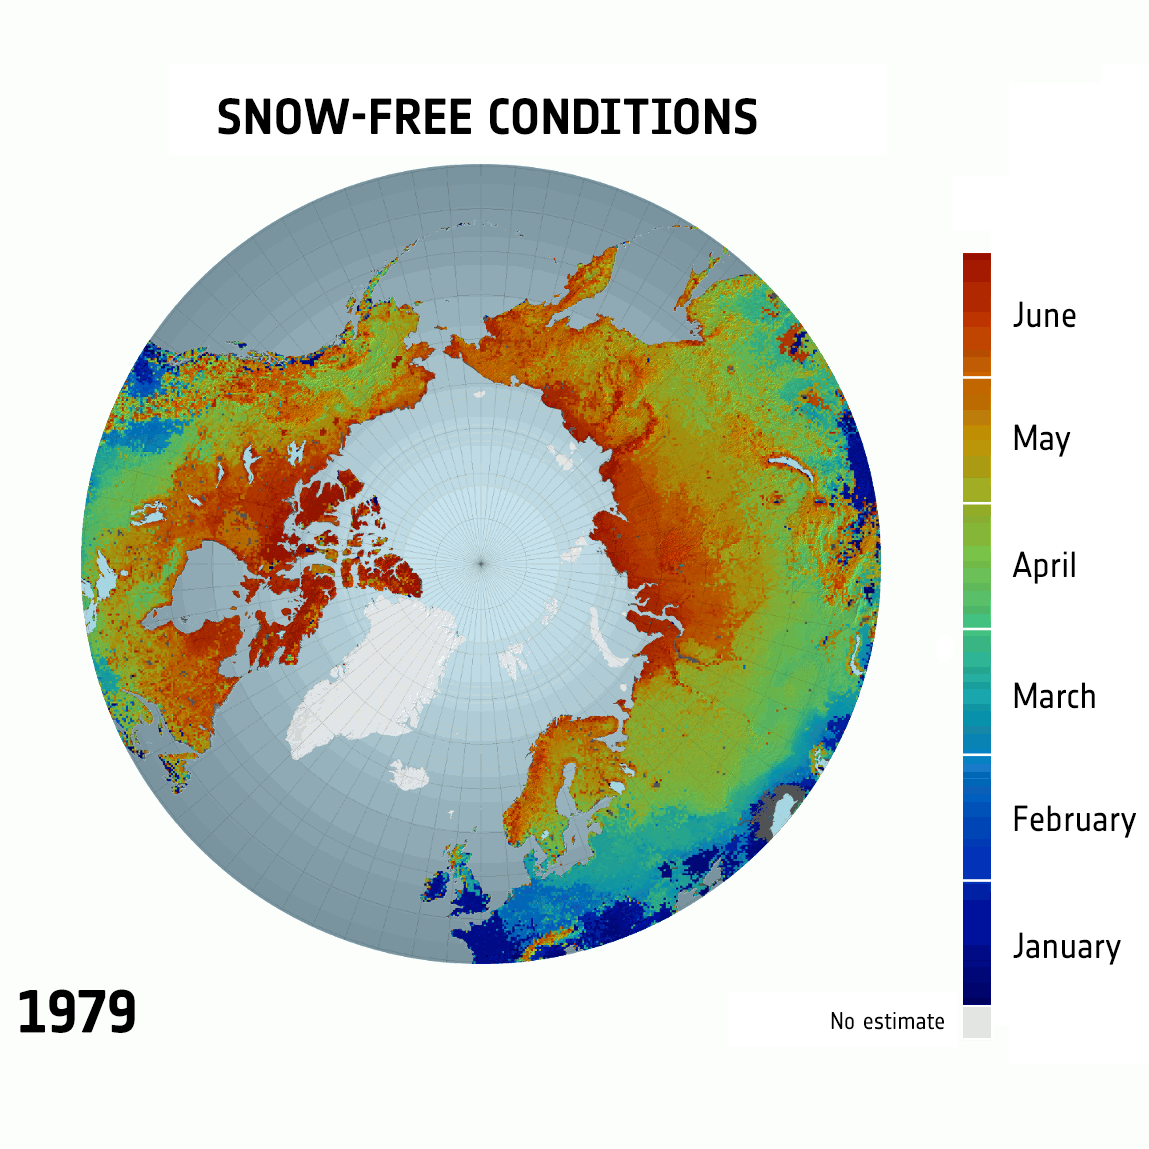 Figure 19: Snow-free conditions: The animation shows when parts of the NH (Northern Hemisphere) became snow-free in the spring each year from 1979 to 2015. Blue represents earlier snow melt (January–March) while red depicts later snow melt (June), image credit: GlobSnow / Finnish Meteorological Institute